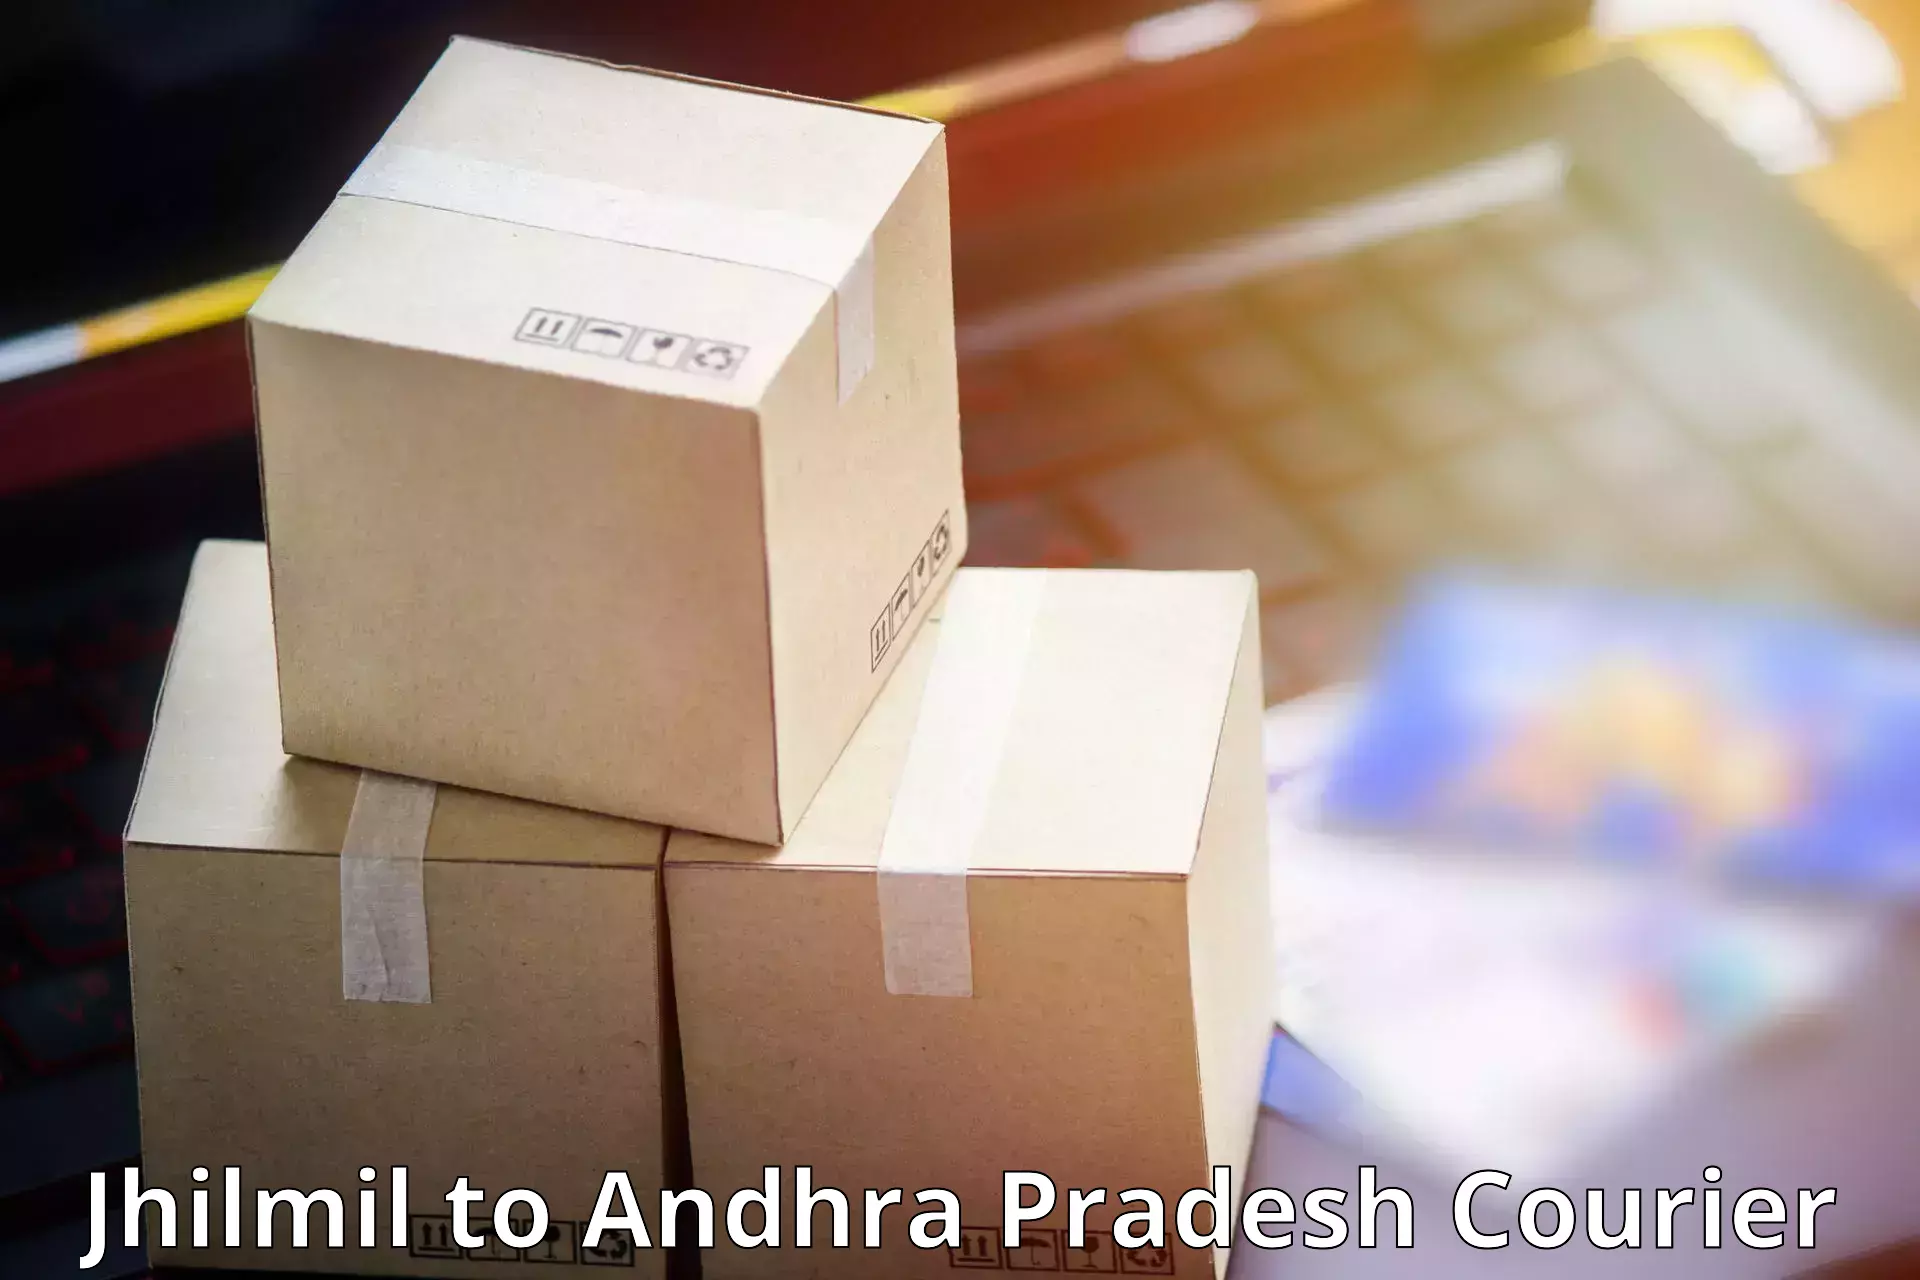 On-call courier service Jhilmil to Yerravaram